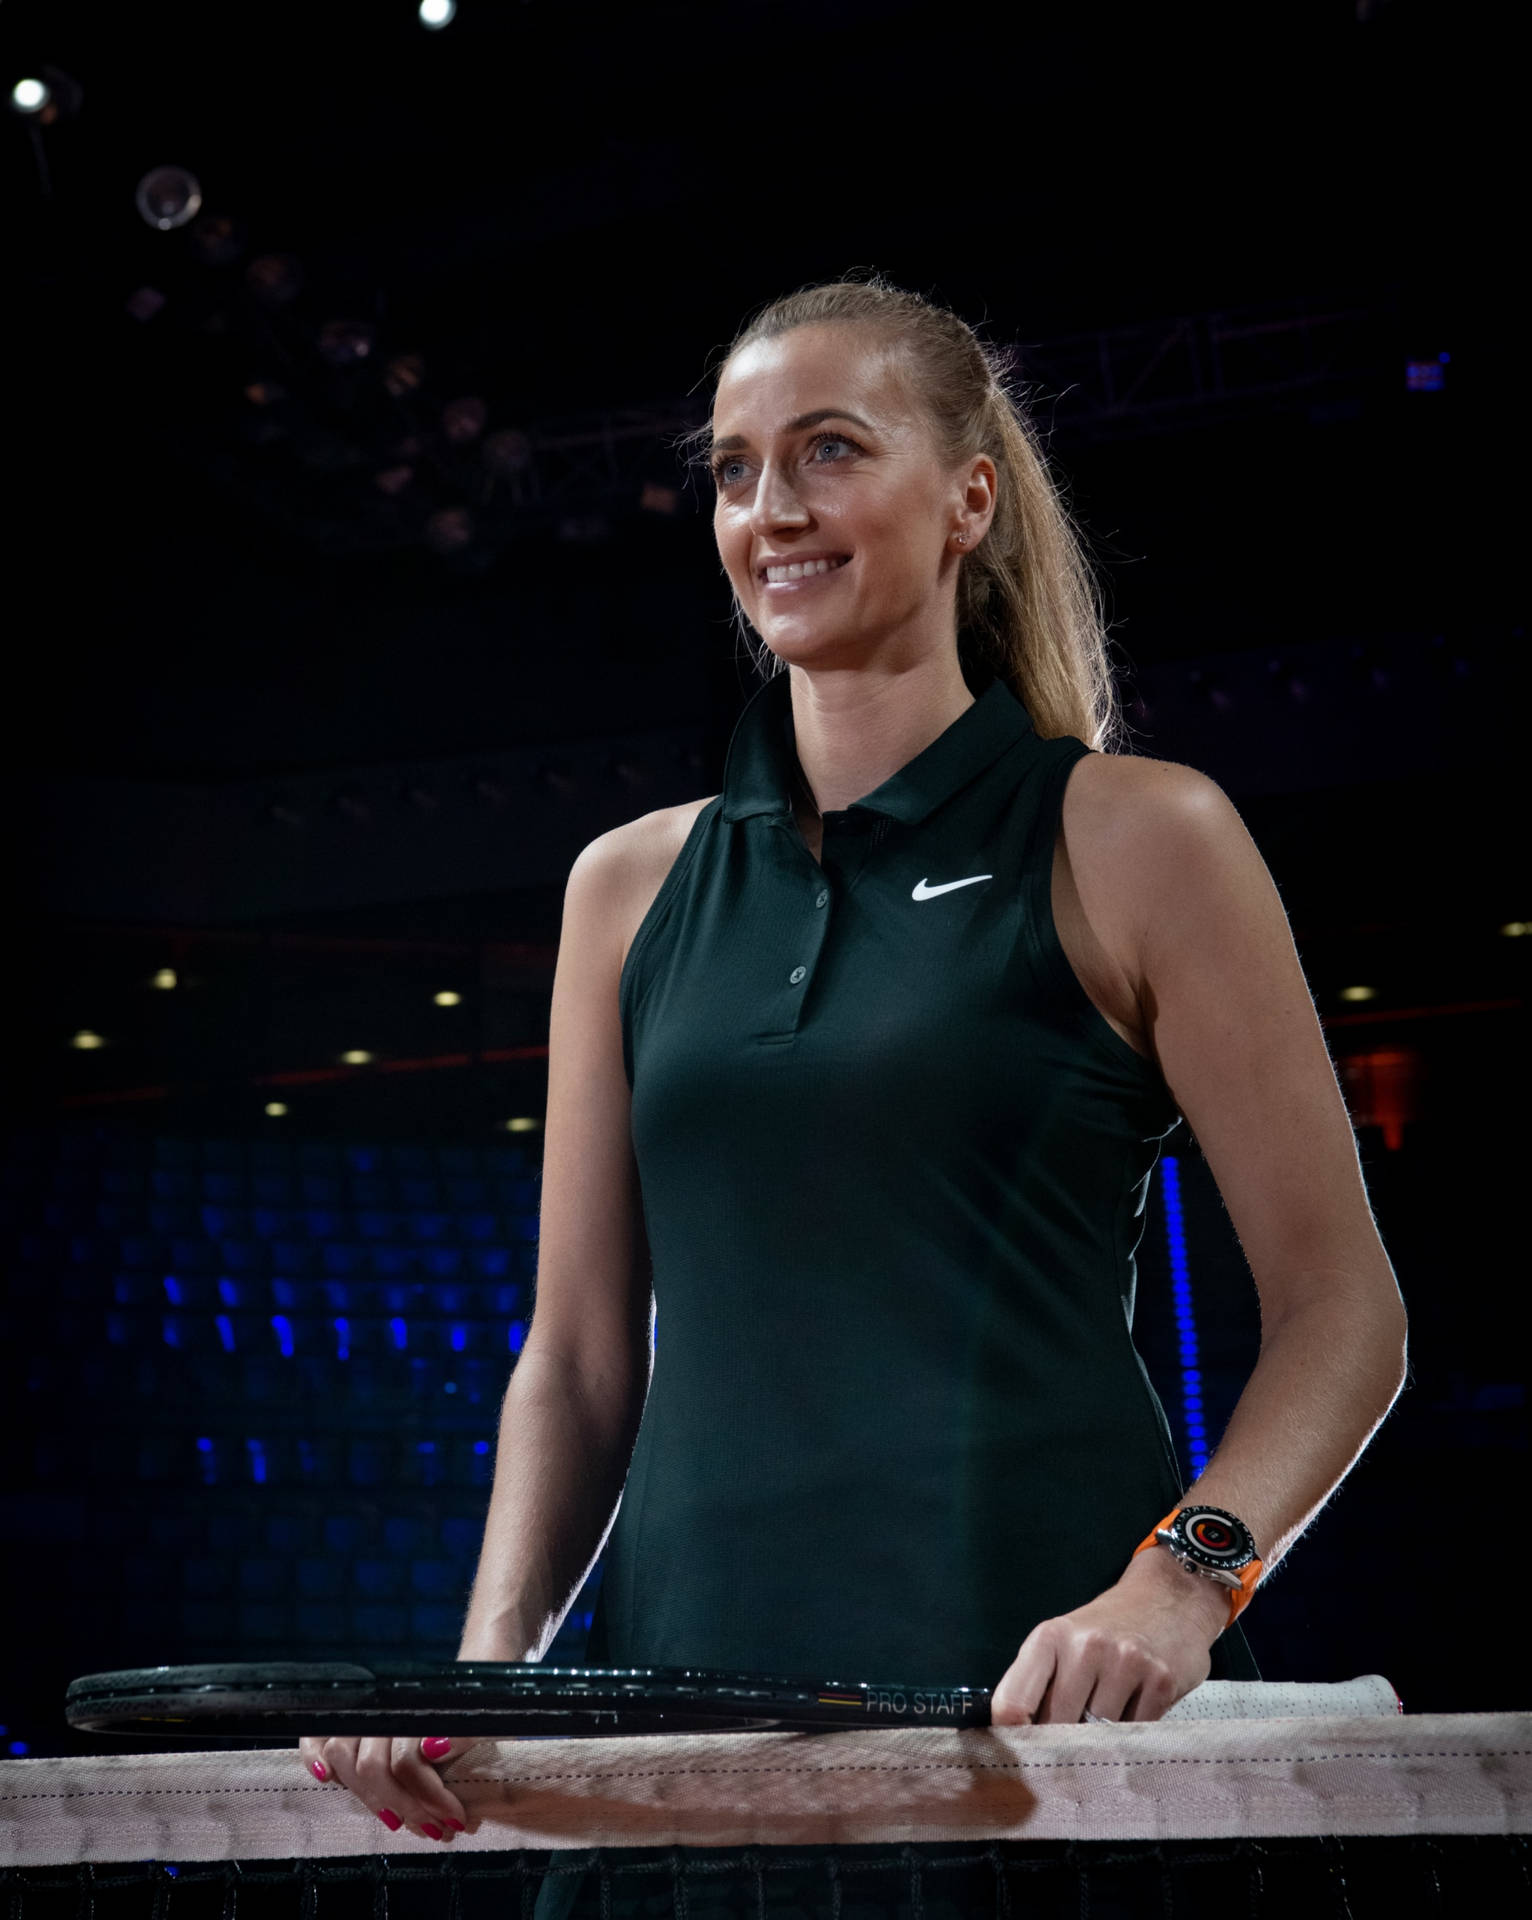 Petra Kvitova Smiling And Radiating Positivity In A Standing Pose Background